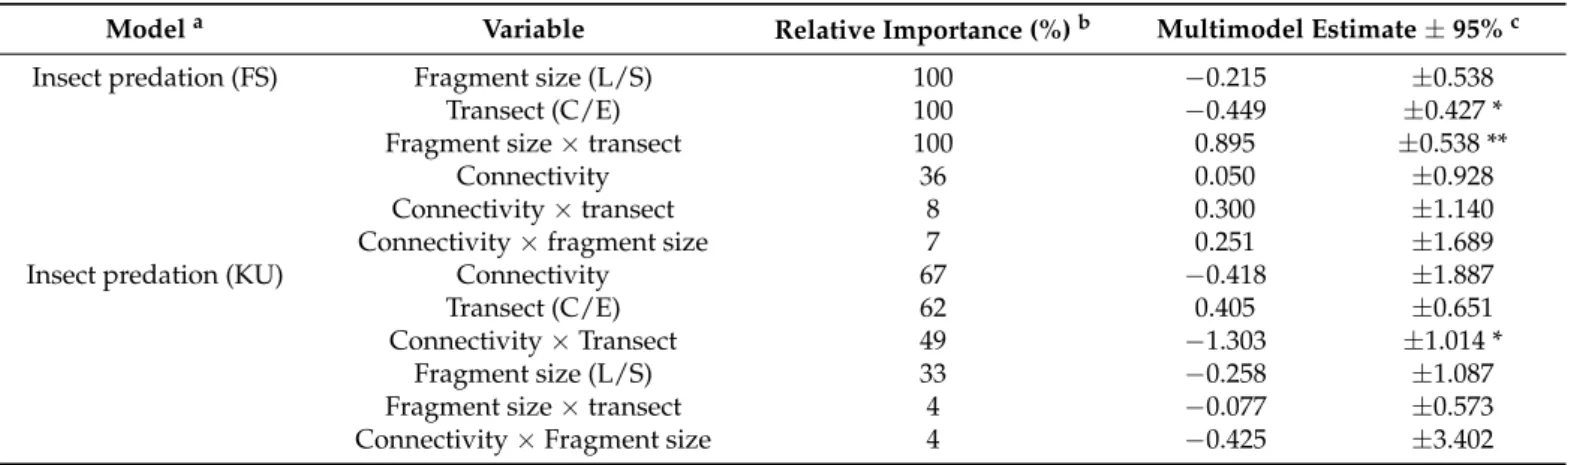 Table 1. Summary table for GLMM results after multimodel averaging of the best candidate models showing relative importance of each explanatory variable (fragment size: large (L) vs